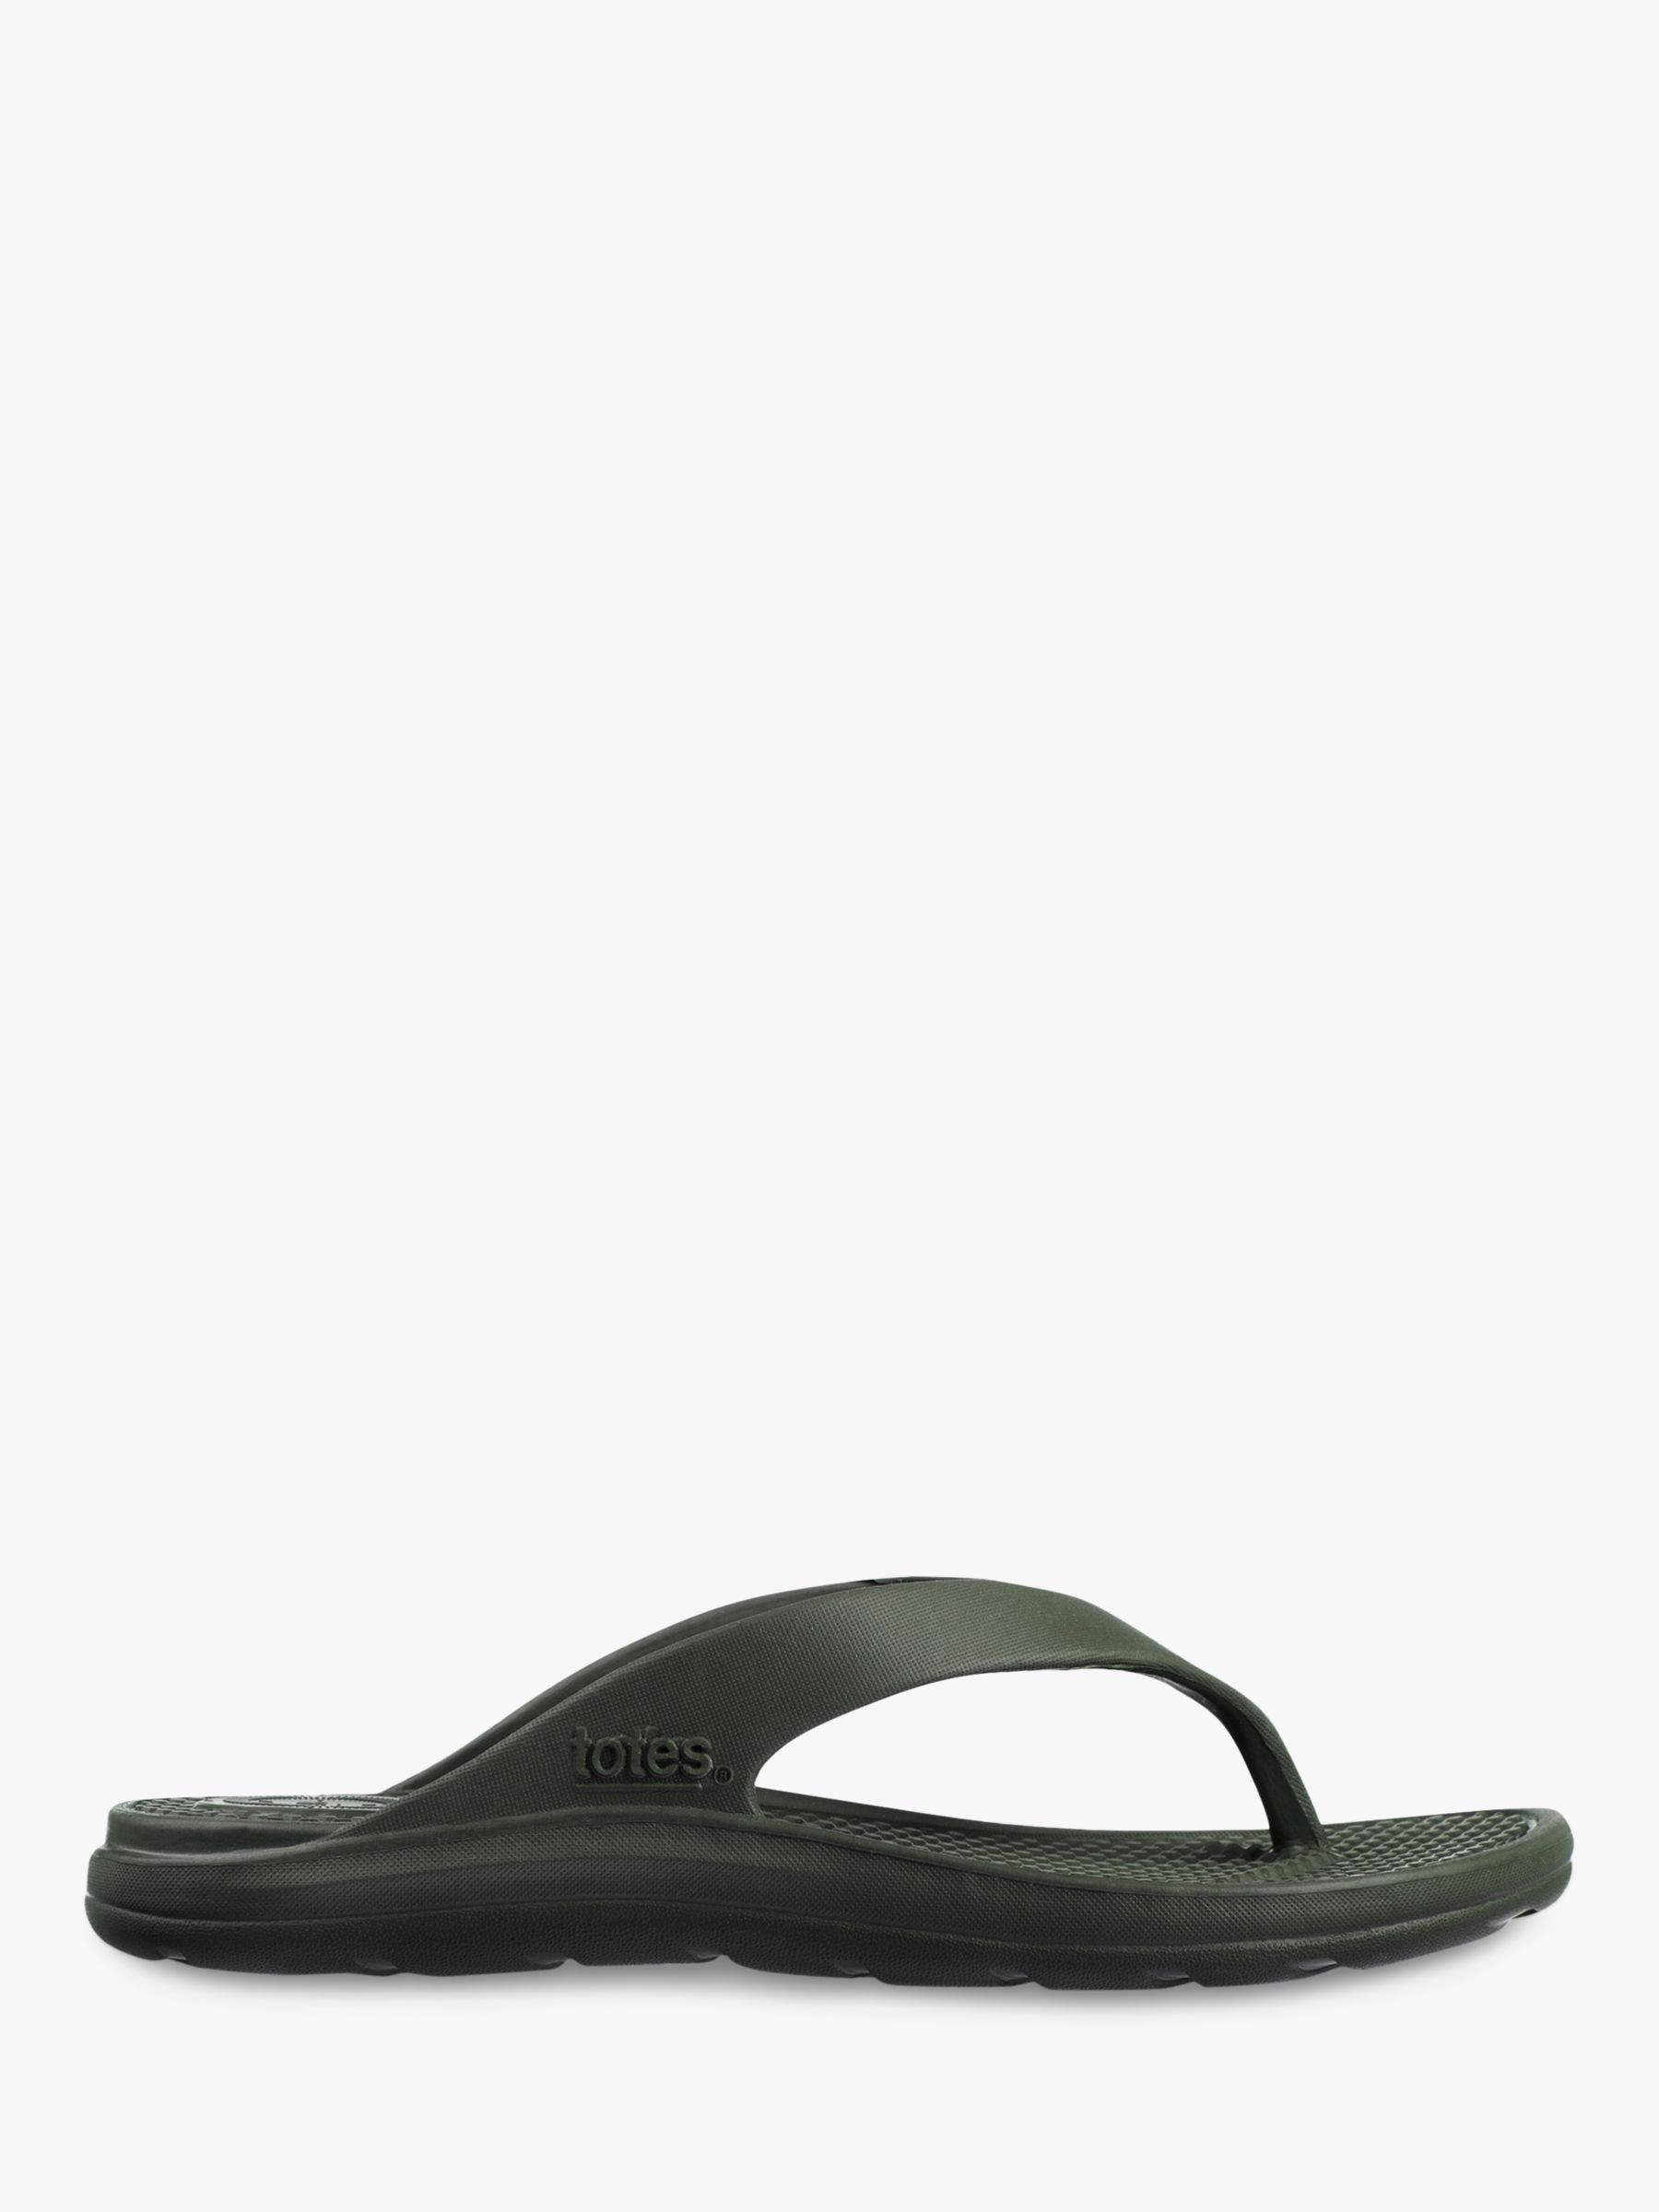 totes SOLBOUNCE Toe Post Sandals, Loden, 7